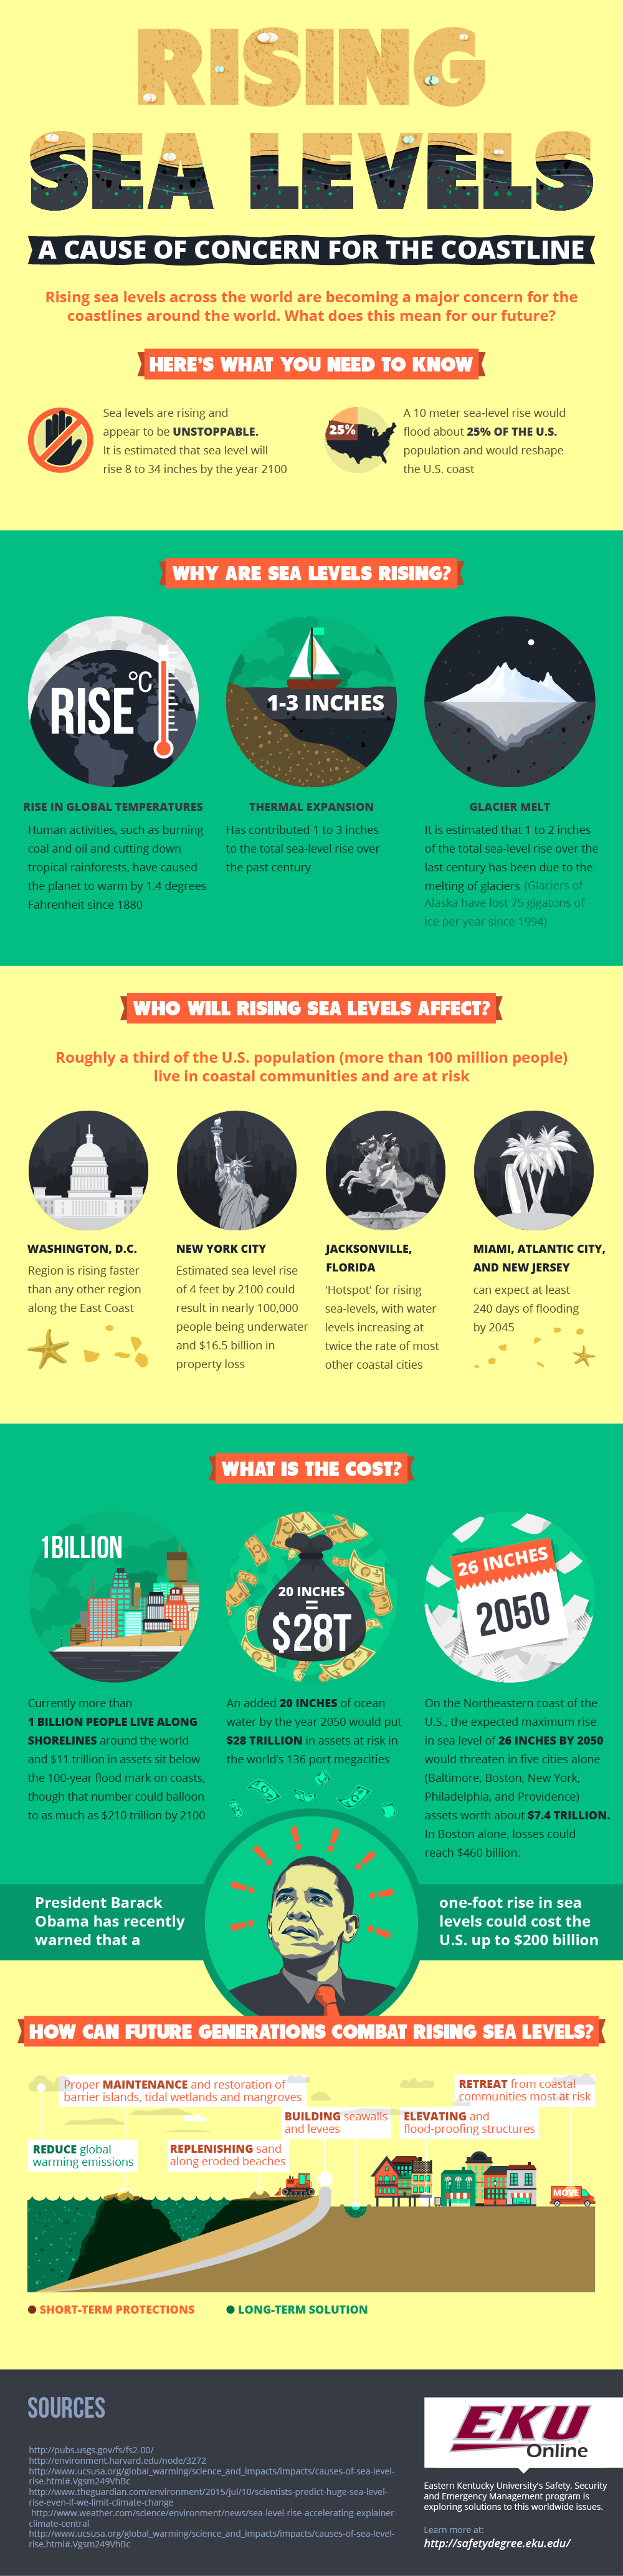 Infographic: Sea Level Rise and Global Warming | Union of ...